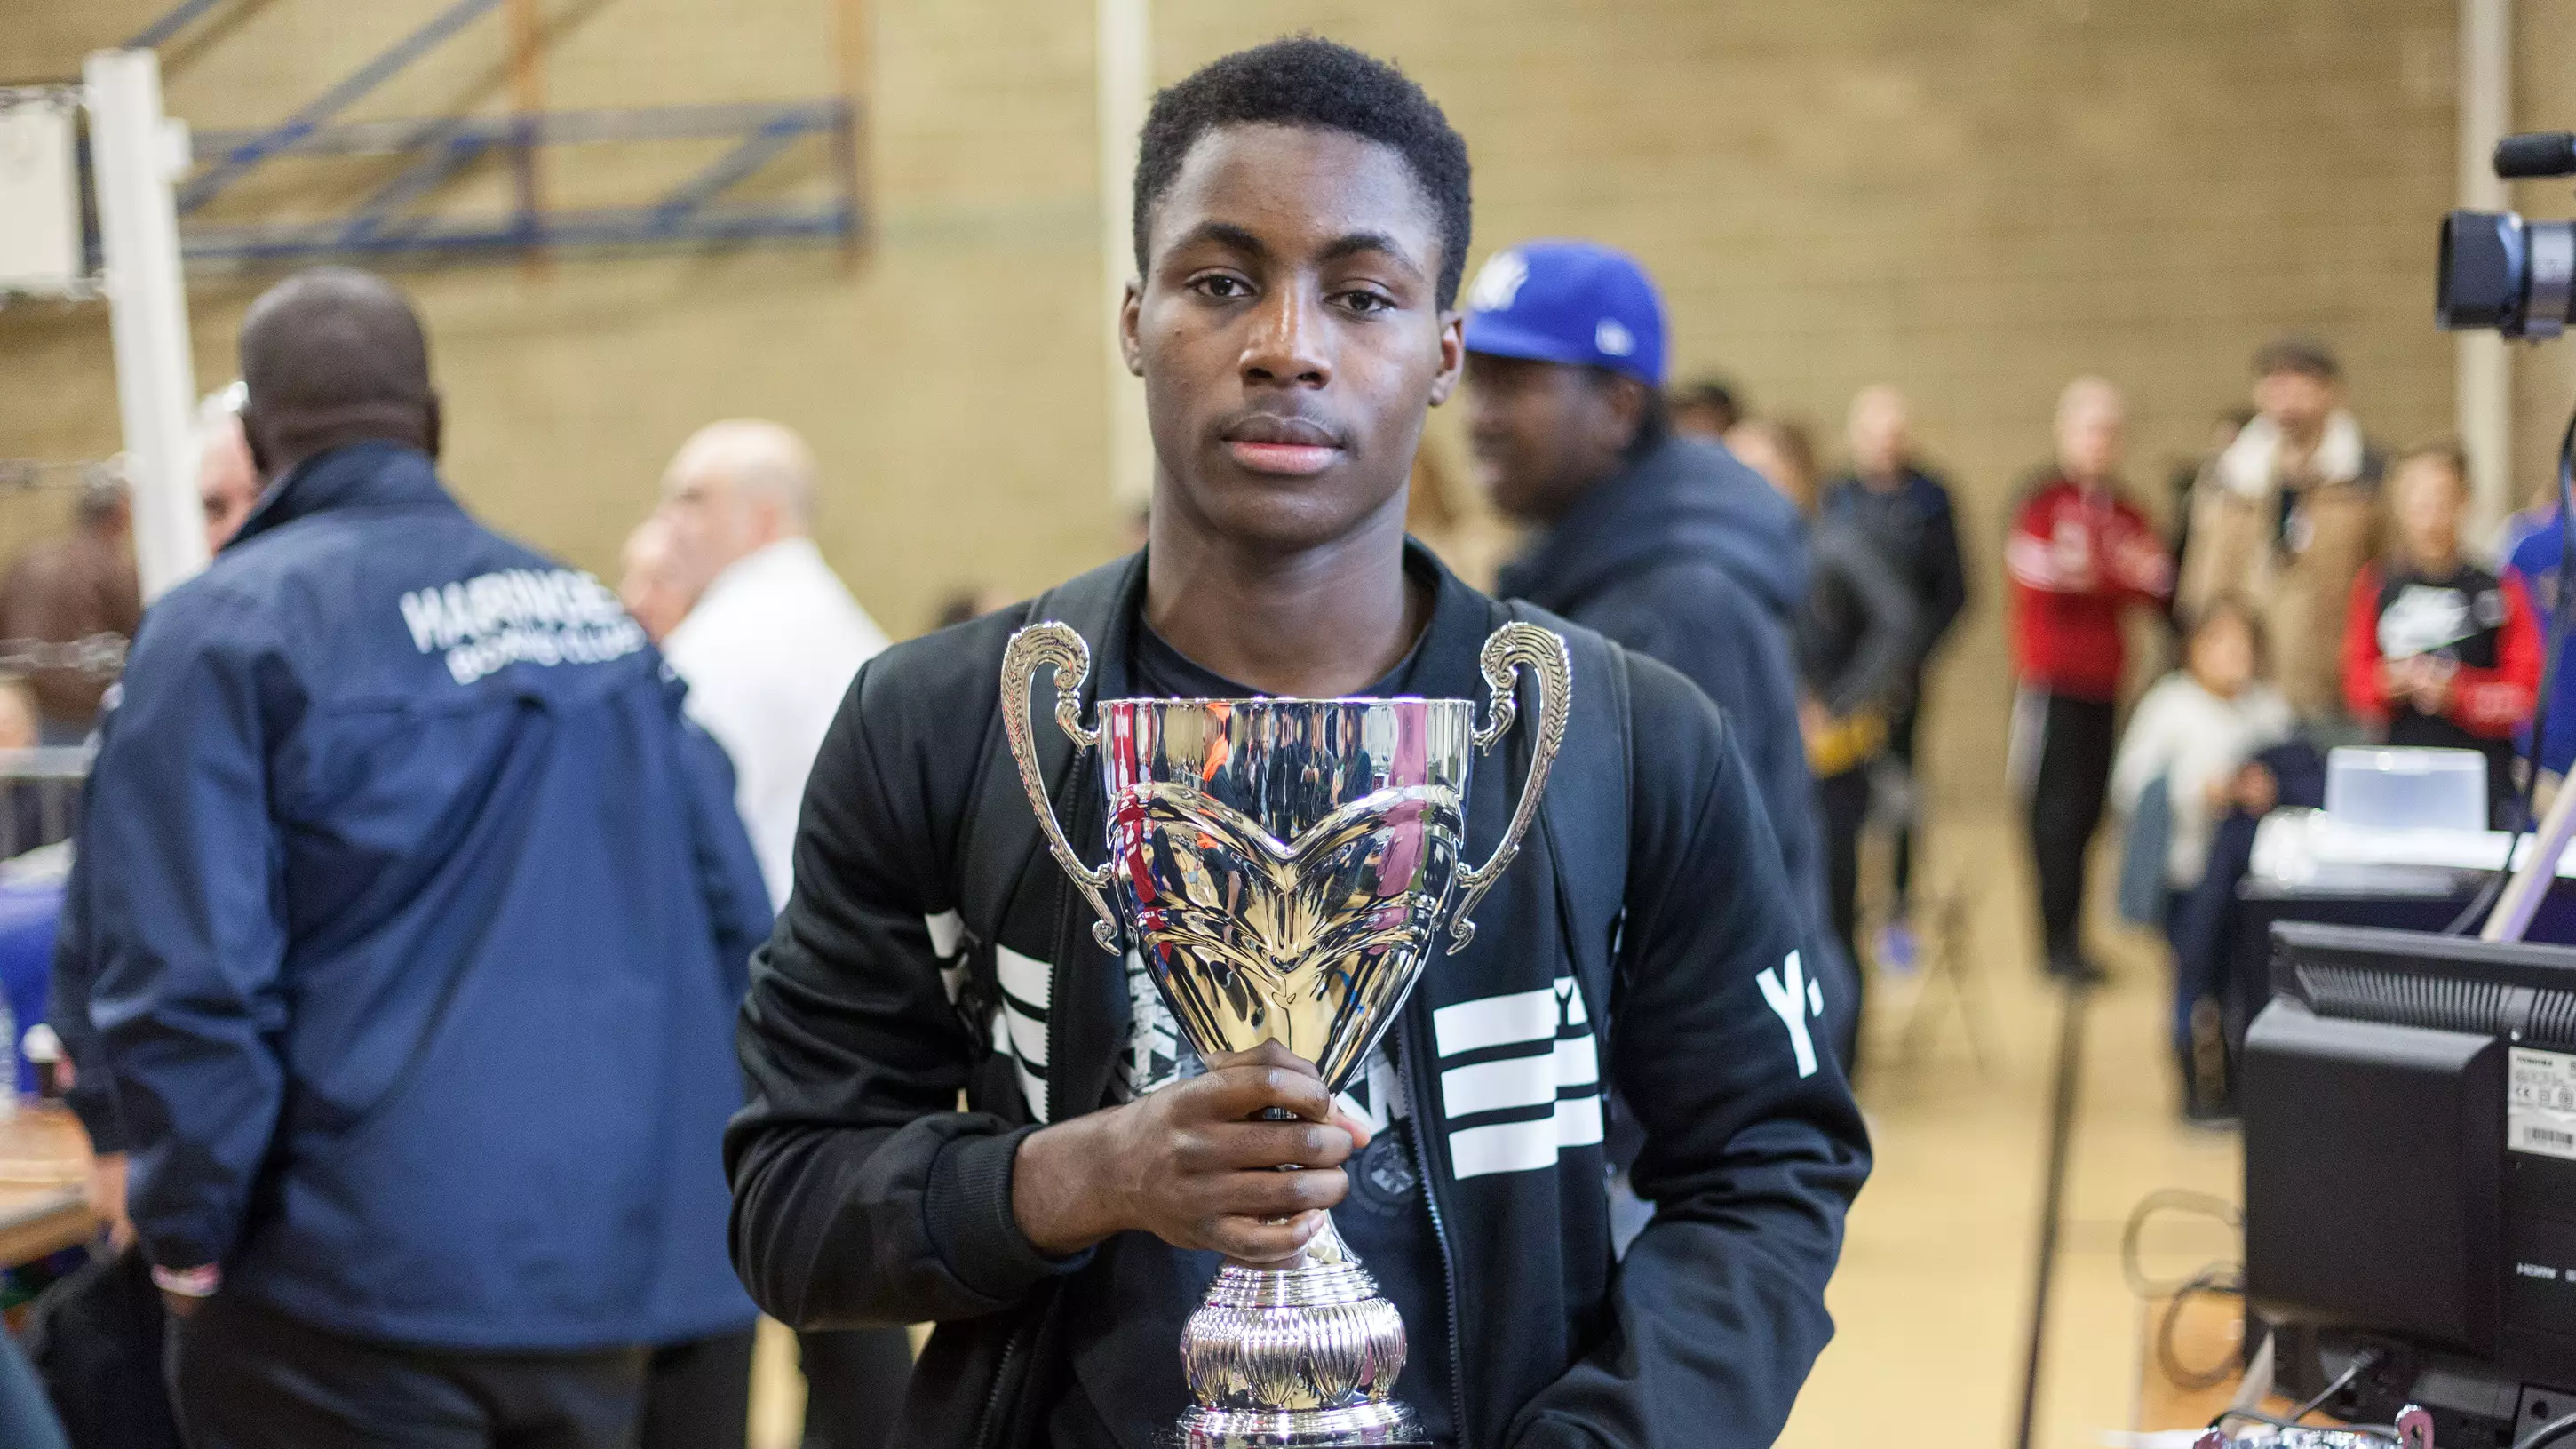 London Teen In The Wrong Crowd Turned His Life Around Thanks To Boxing